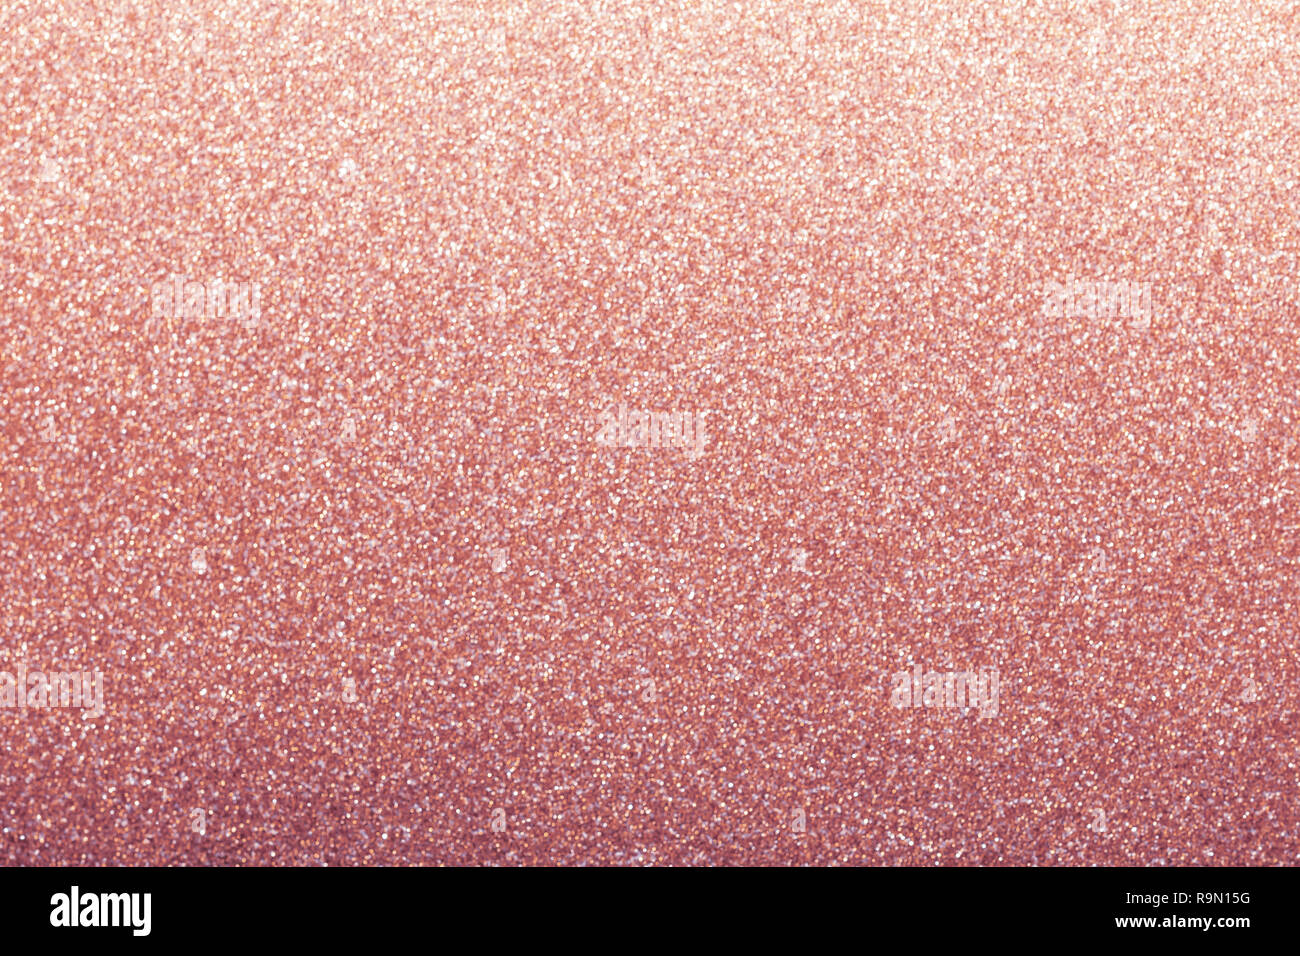 Colored Pencils On Glitter Red Background Stock Photo - Download